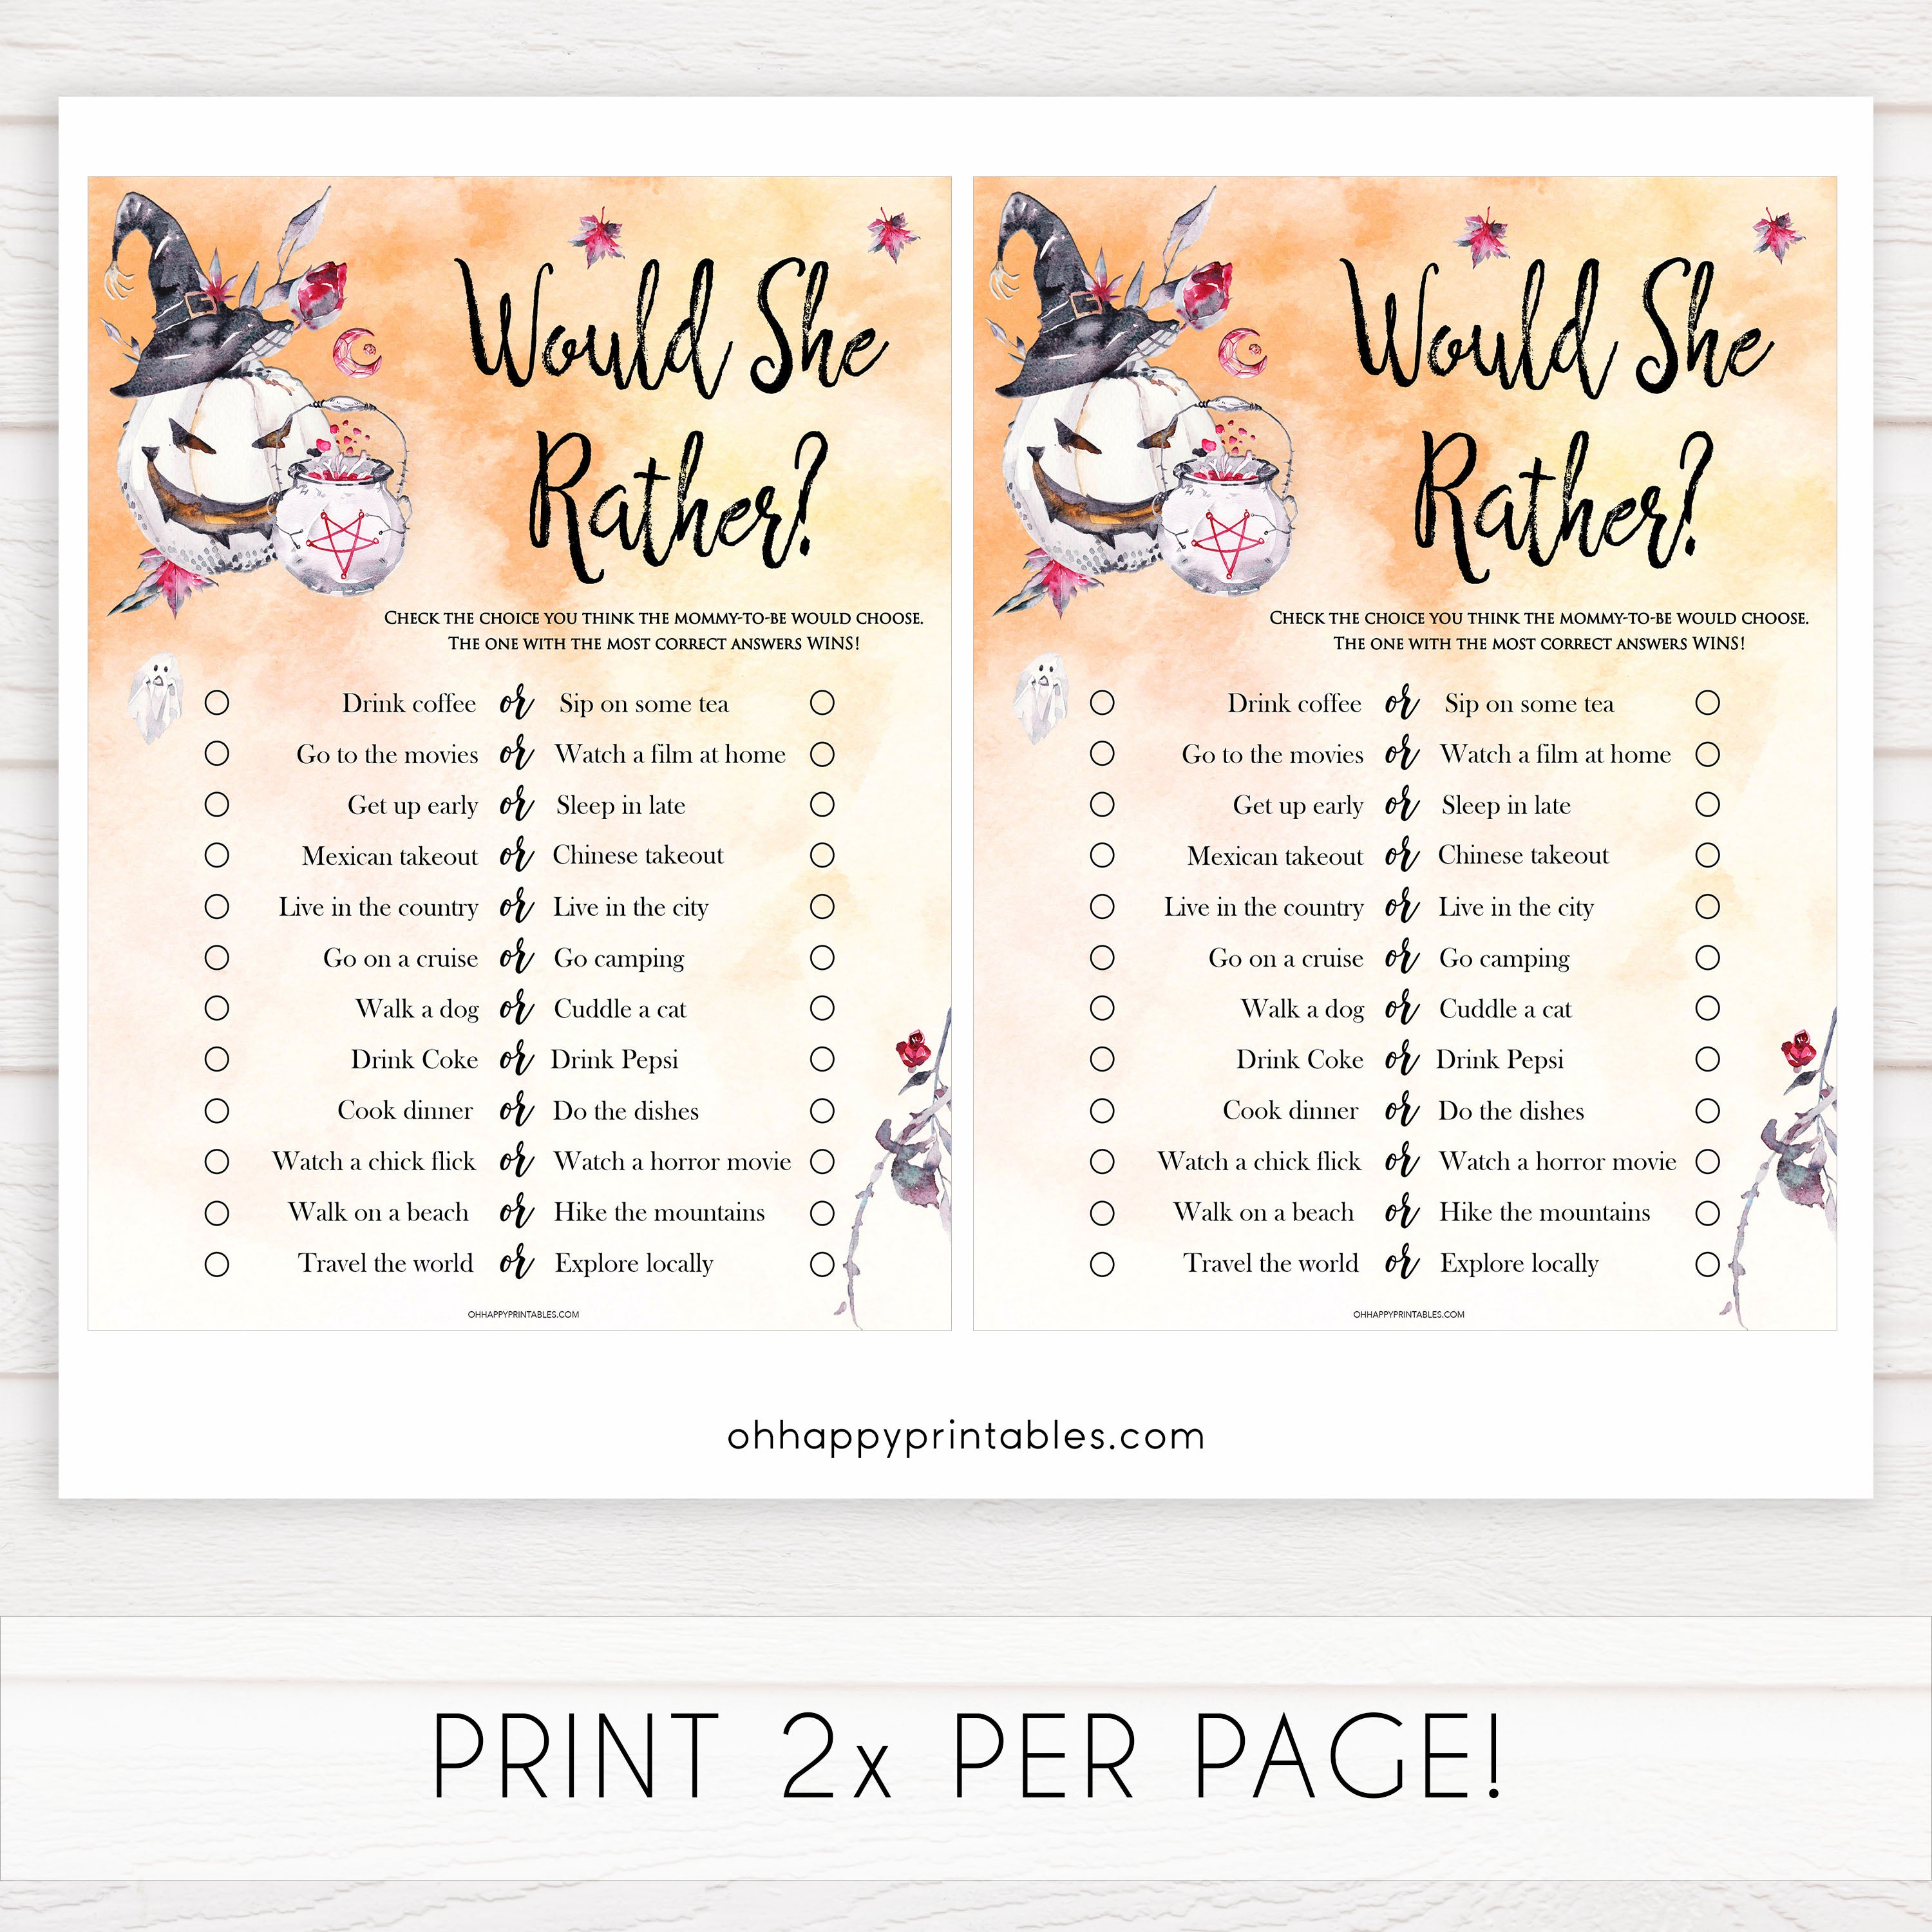 Would She Rather - Printable Pumpkin Baby Shower Games – OhHappyPrintables